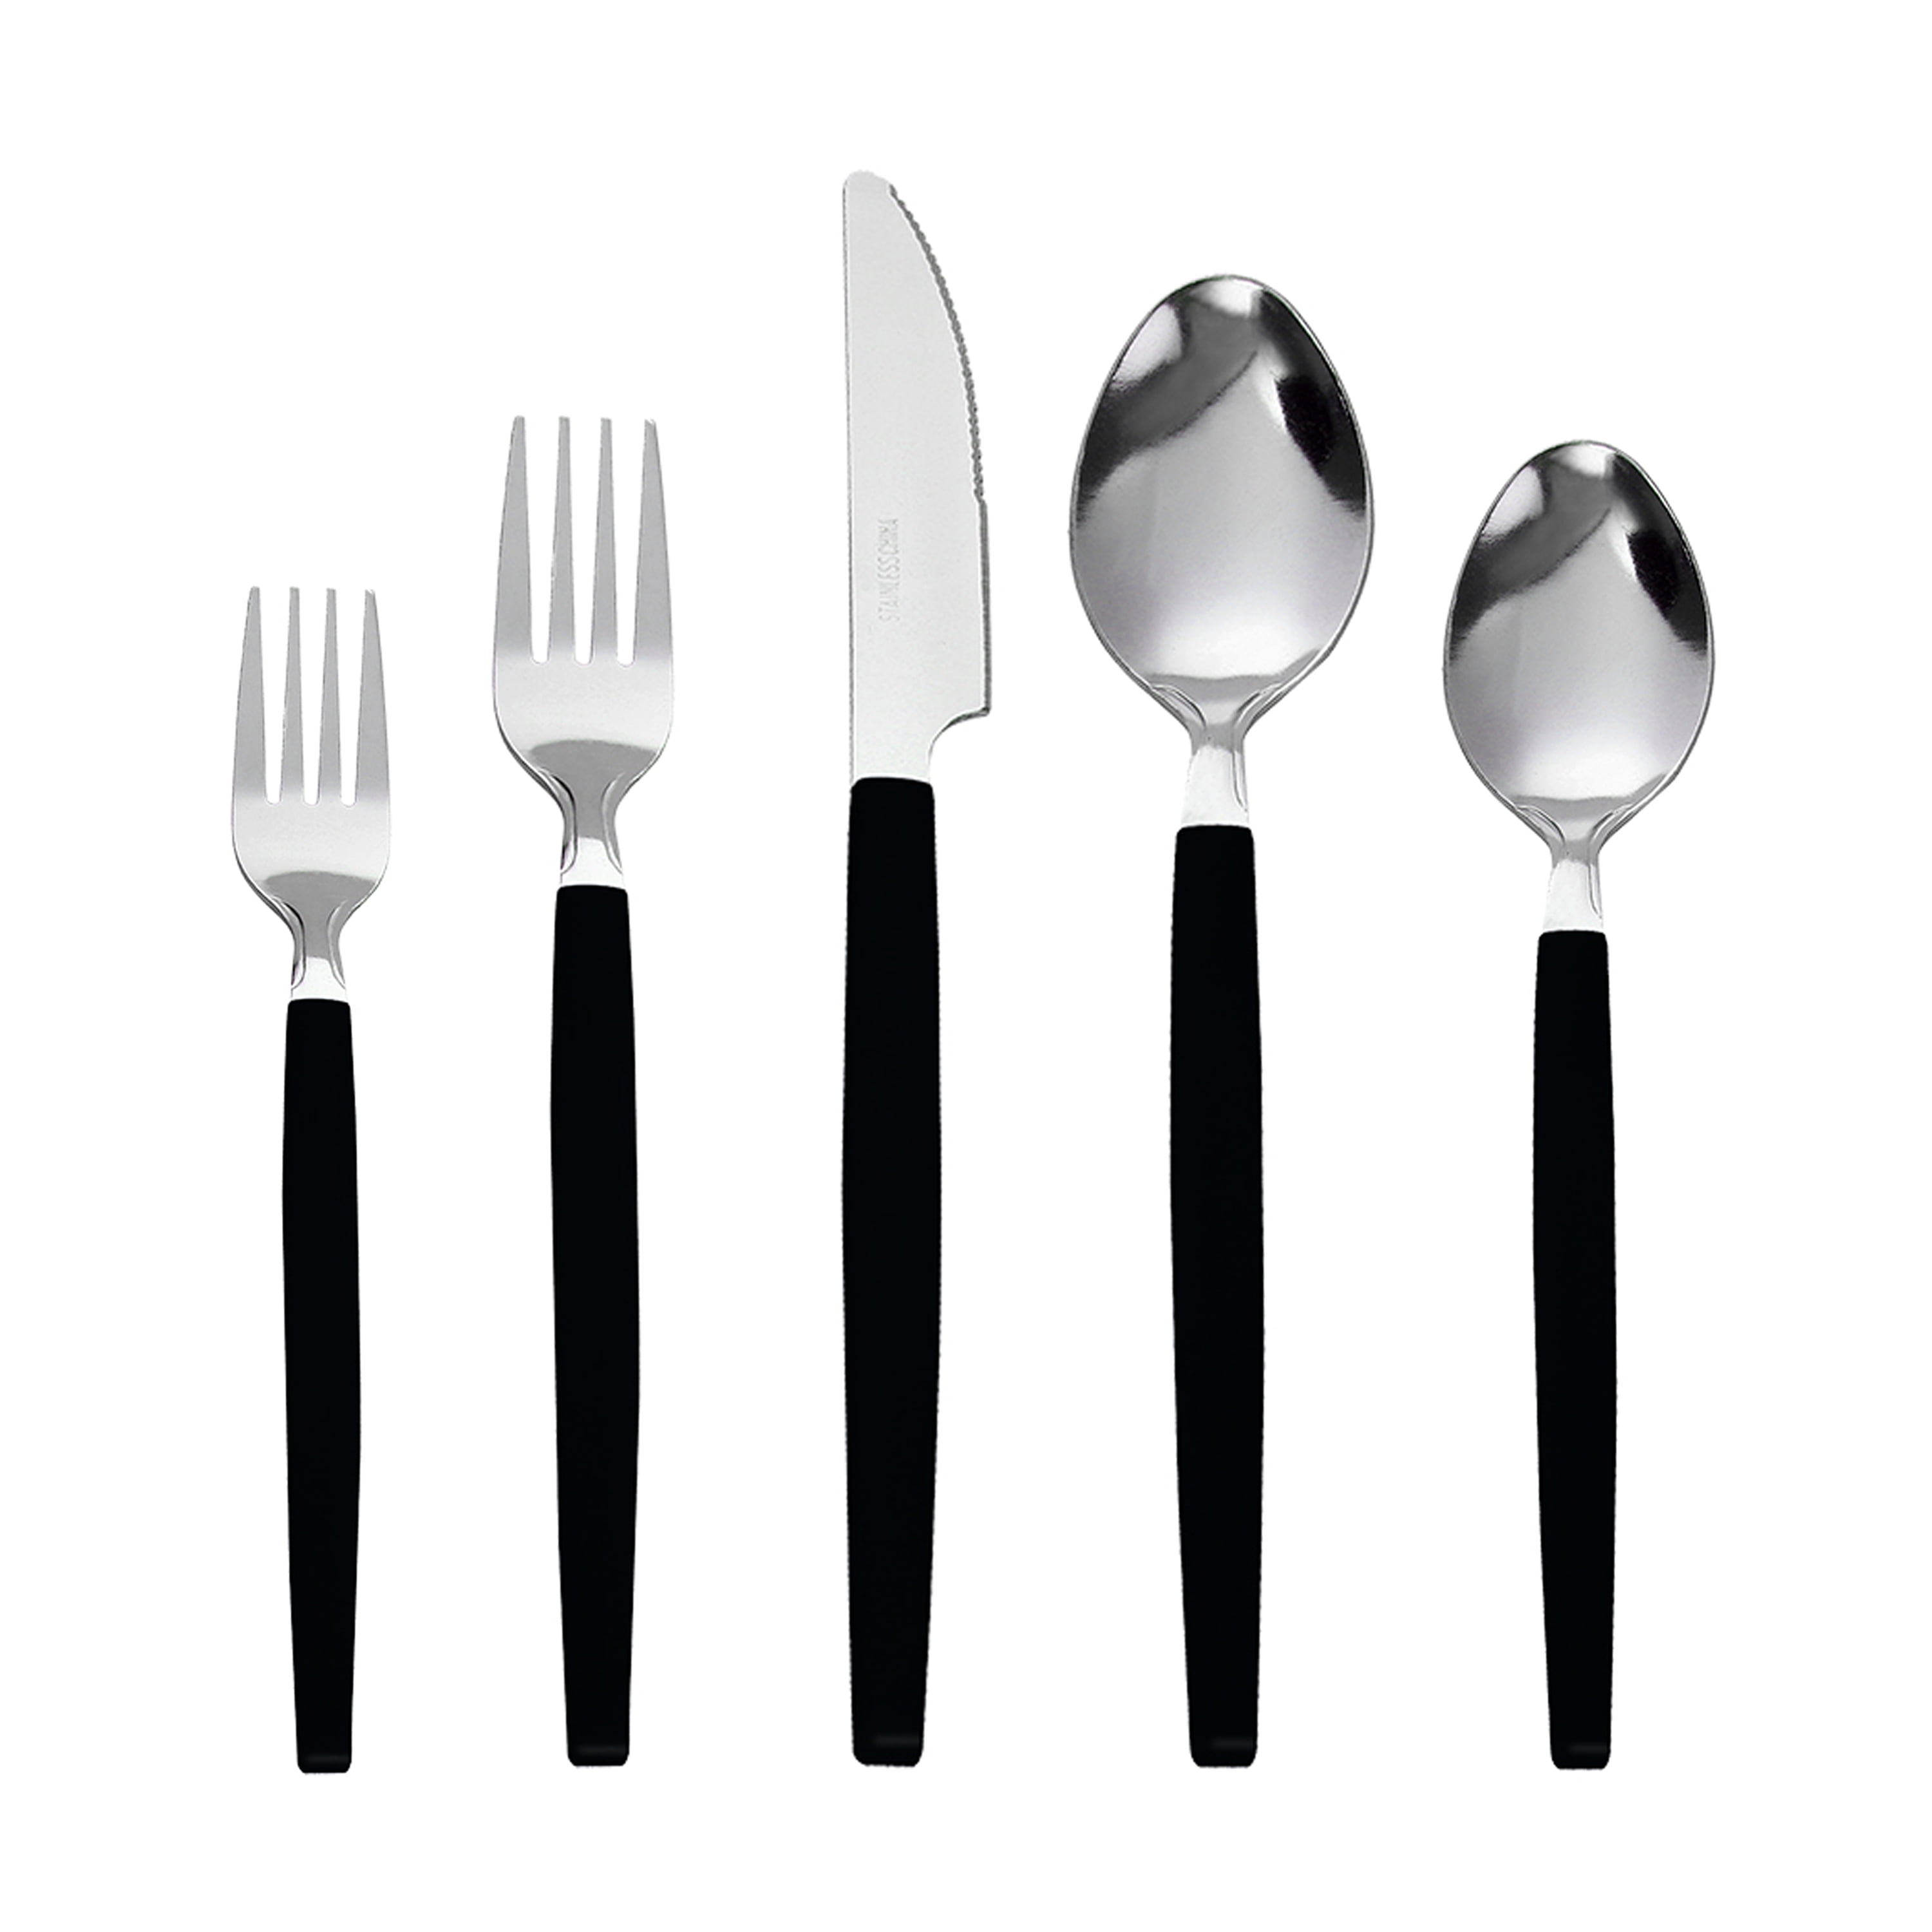 Mainstays 49 Piece Stainless Steel and Plastic Flatware Set with Organizer Tray, Black